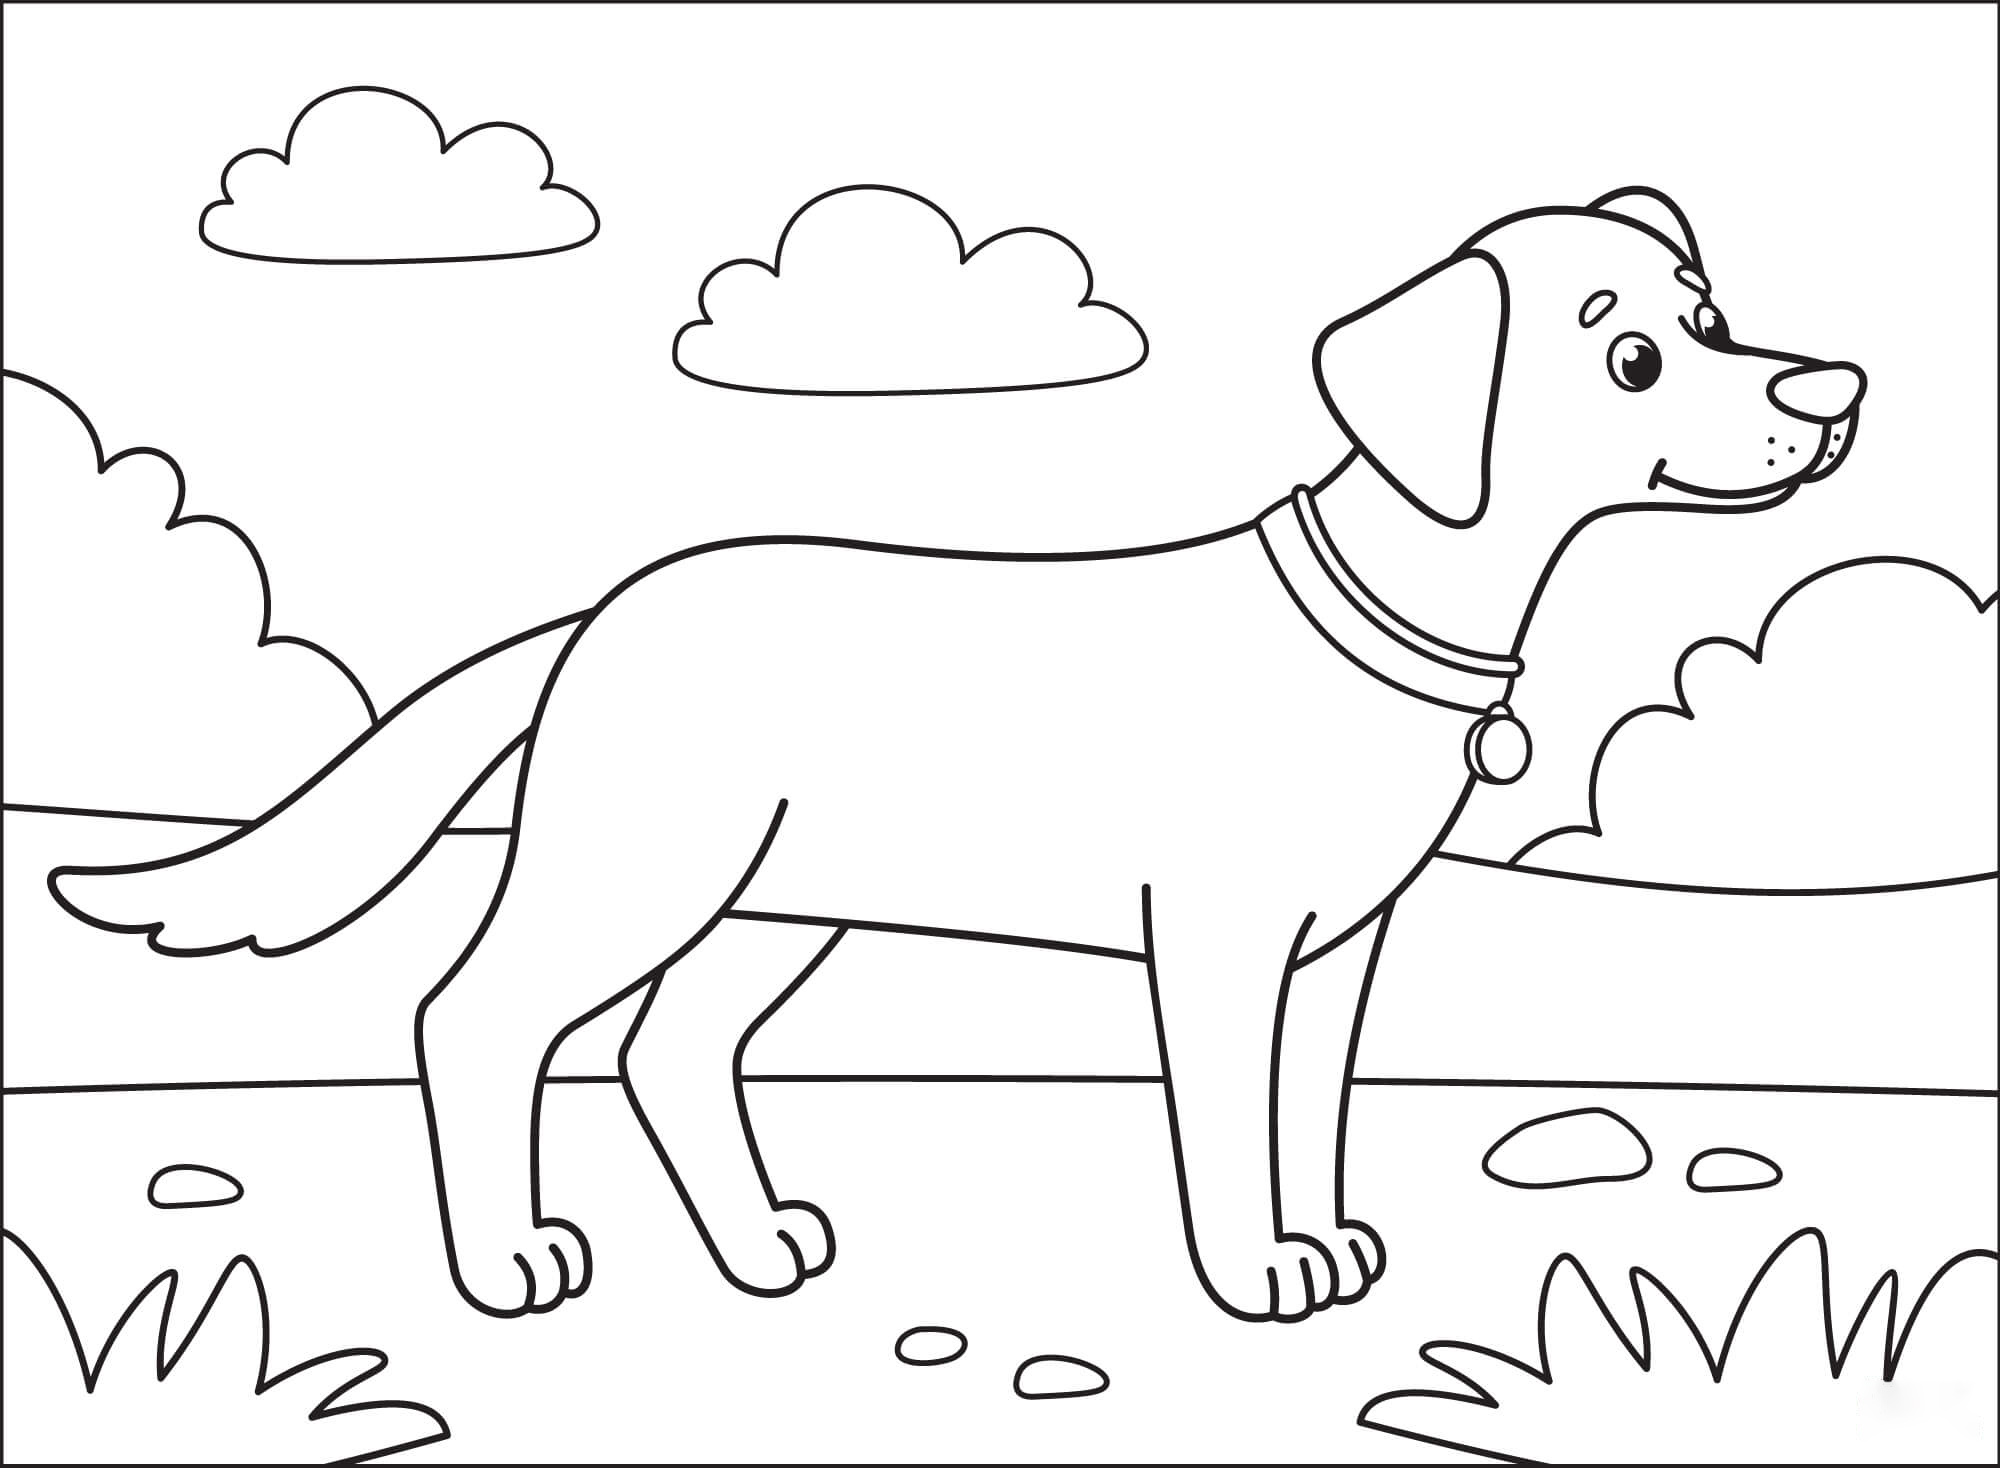 Blacklab Coloring Pages